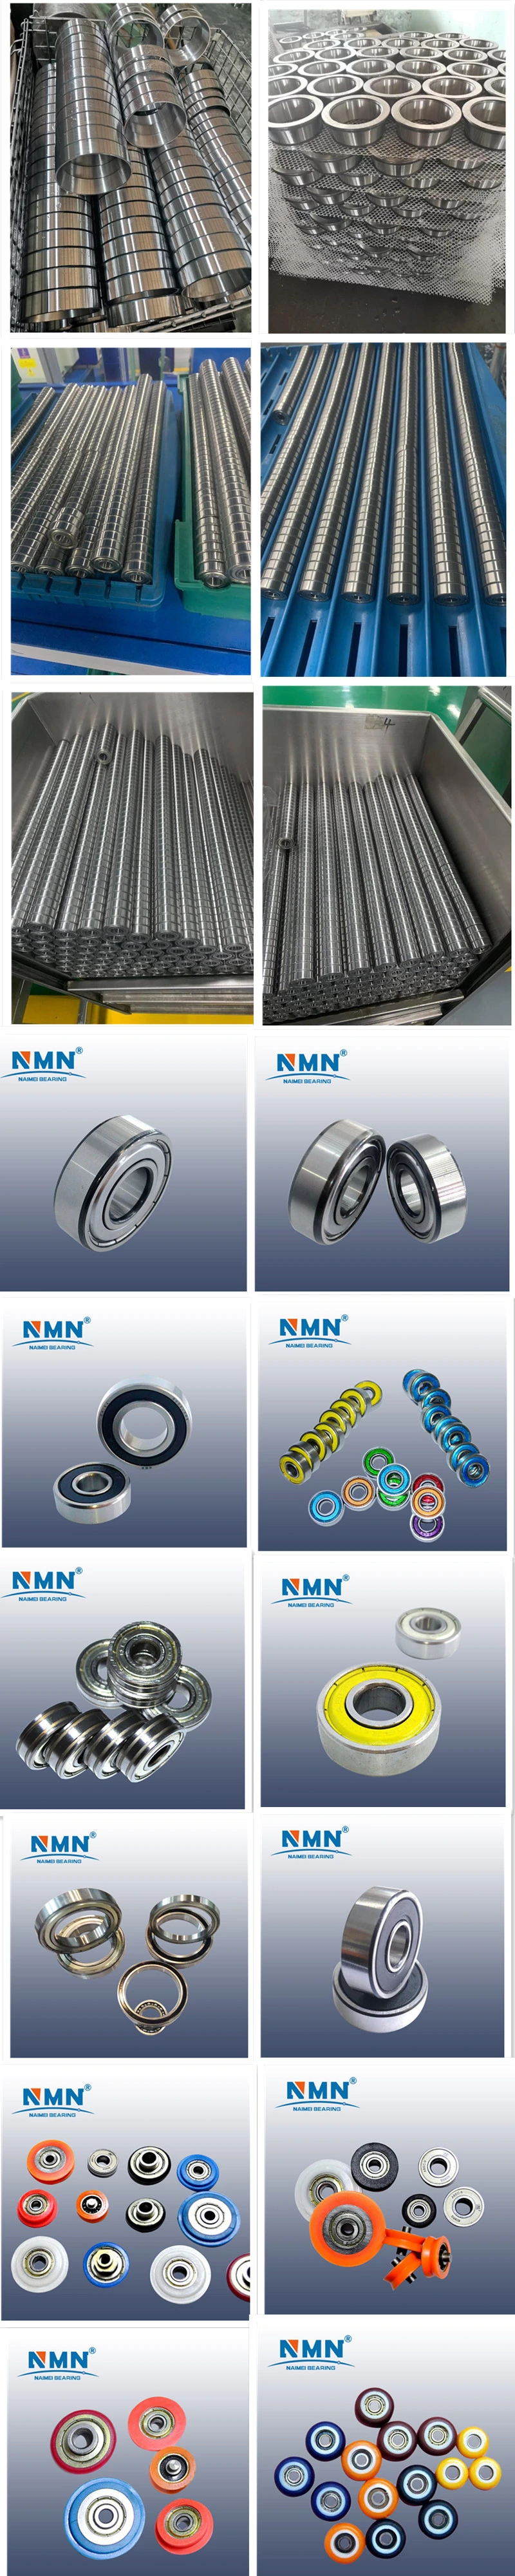 Bearing for Agriculture Stainless Steel Pillow Block Bearing UC 205 UCP 205 UC 208 UCP 208 UC 206 UCP 206